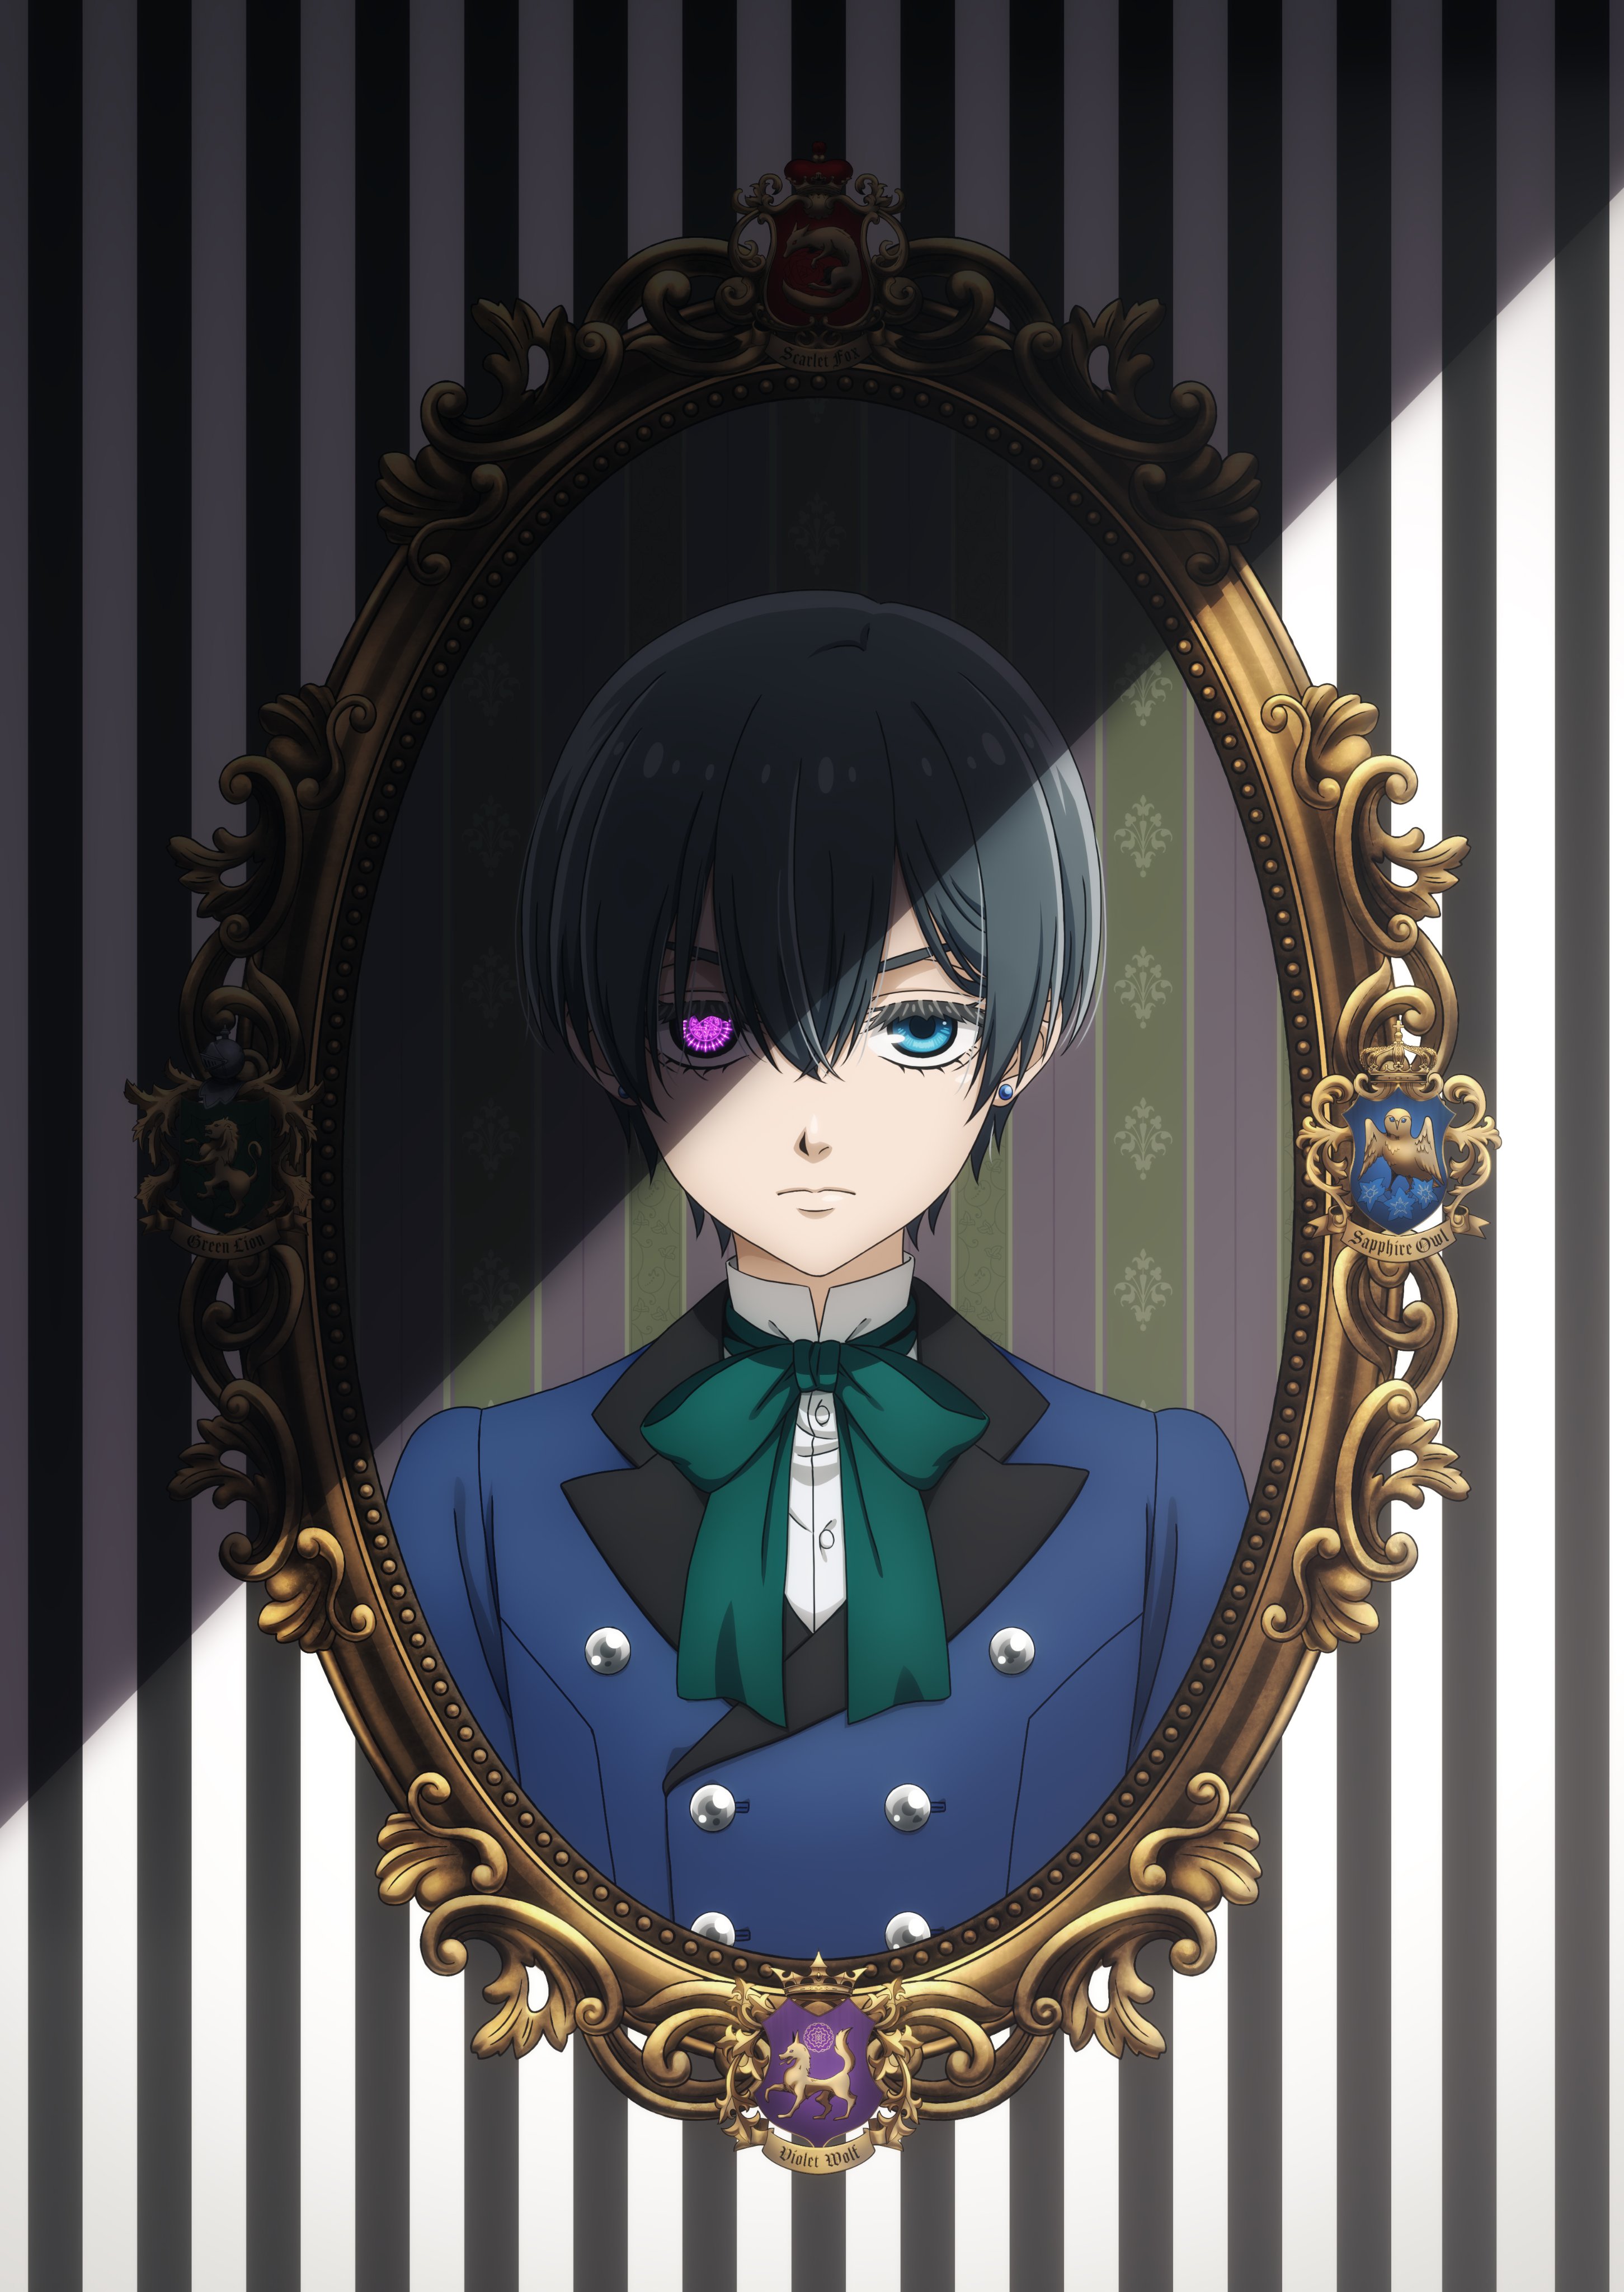 Black Butler' Trailer and New Season in 2024, Confirmed